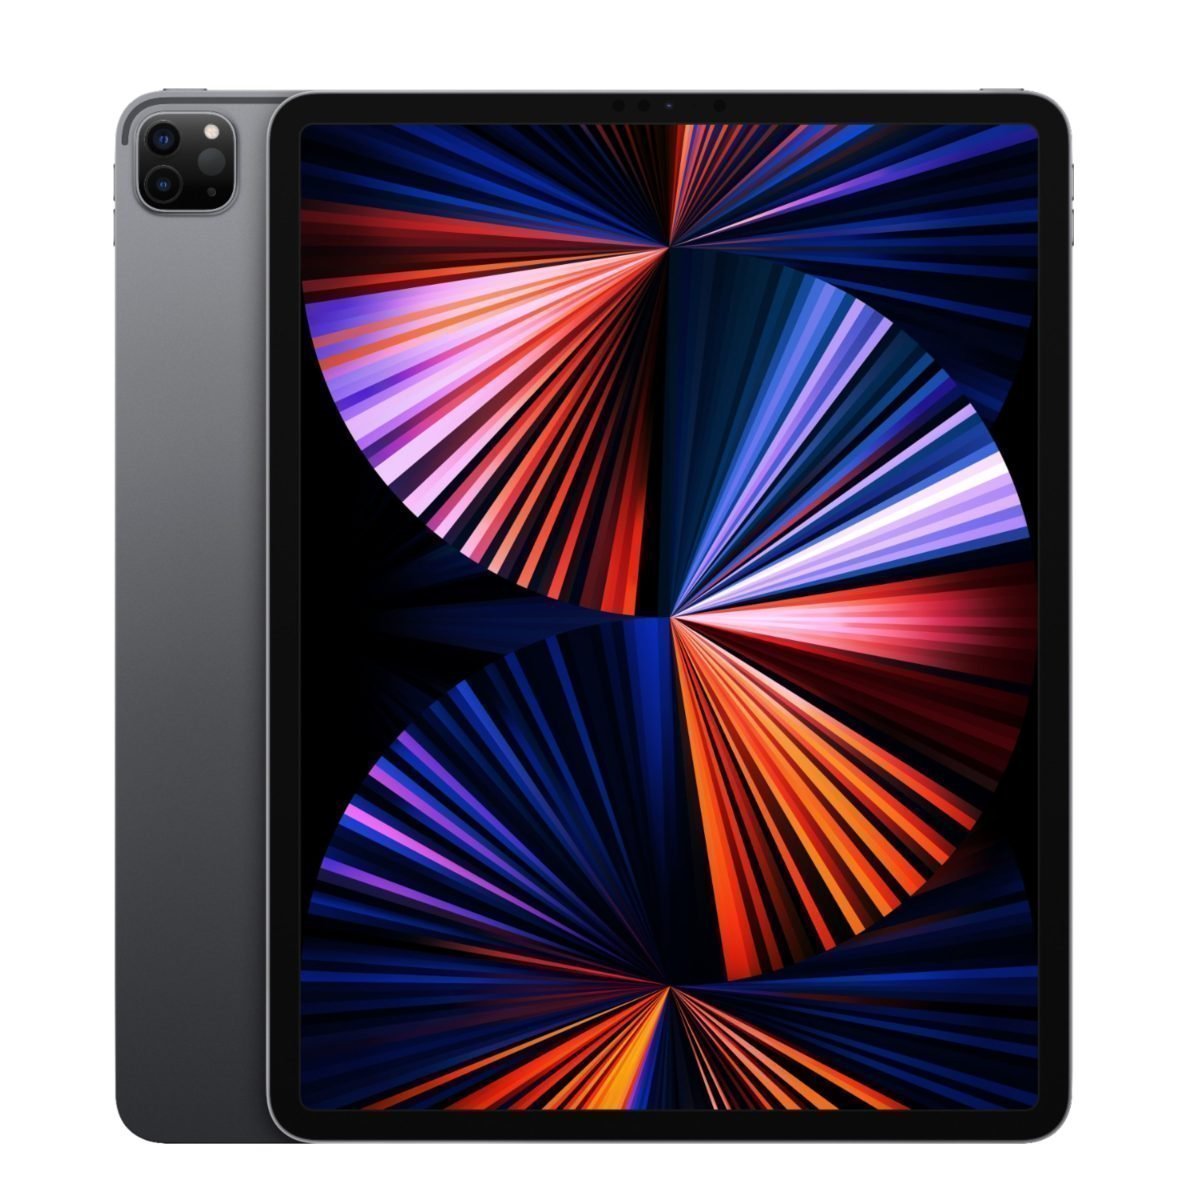 4264603 Sd Scaled Apple &Amp;Lt;H1&Amp;Gt;Apple - 12.9-Inch Ipad Pro Latest Model (5Th Generation) With Wi-Fi - 256Gb - Space Gray&Amp;Lt;/H1&Amp;Gt; Https://Www.youtube.com/Watch?V=Aoq49Euwnio Ipad Pro Features The Powerful Apple M1 Chip For Next-Level Performance And All-Day Battery Life.an Immersive 12.9-Inch Liquid Retina Xdr Display For Viewing And Editing Hdr Photos And Videos. And A Front Camera With Center Stage Keeps You In Frame Automatically During Video Calls. Ipad Pro Has Pro Cameras And A Lidar Scanner For Stunning Photos, Videos, And Immersive Ar. Thunderbolt For Connecting To High-Performance Accessories. And You Can Add Apple Pencil For Note-Taking, Drawing, And Marking Up Documents, And The Magic Keyboard For A Responsive Typing Experience And Trackpad. Ipad Pro Apple - 12.9-Inch Ipad Pro Latest Model (5Th Generation) With Wi-Fi - 256Gb - Space Gray Mhnh3